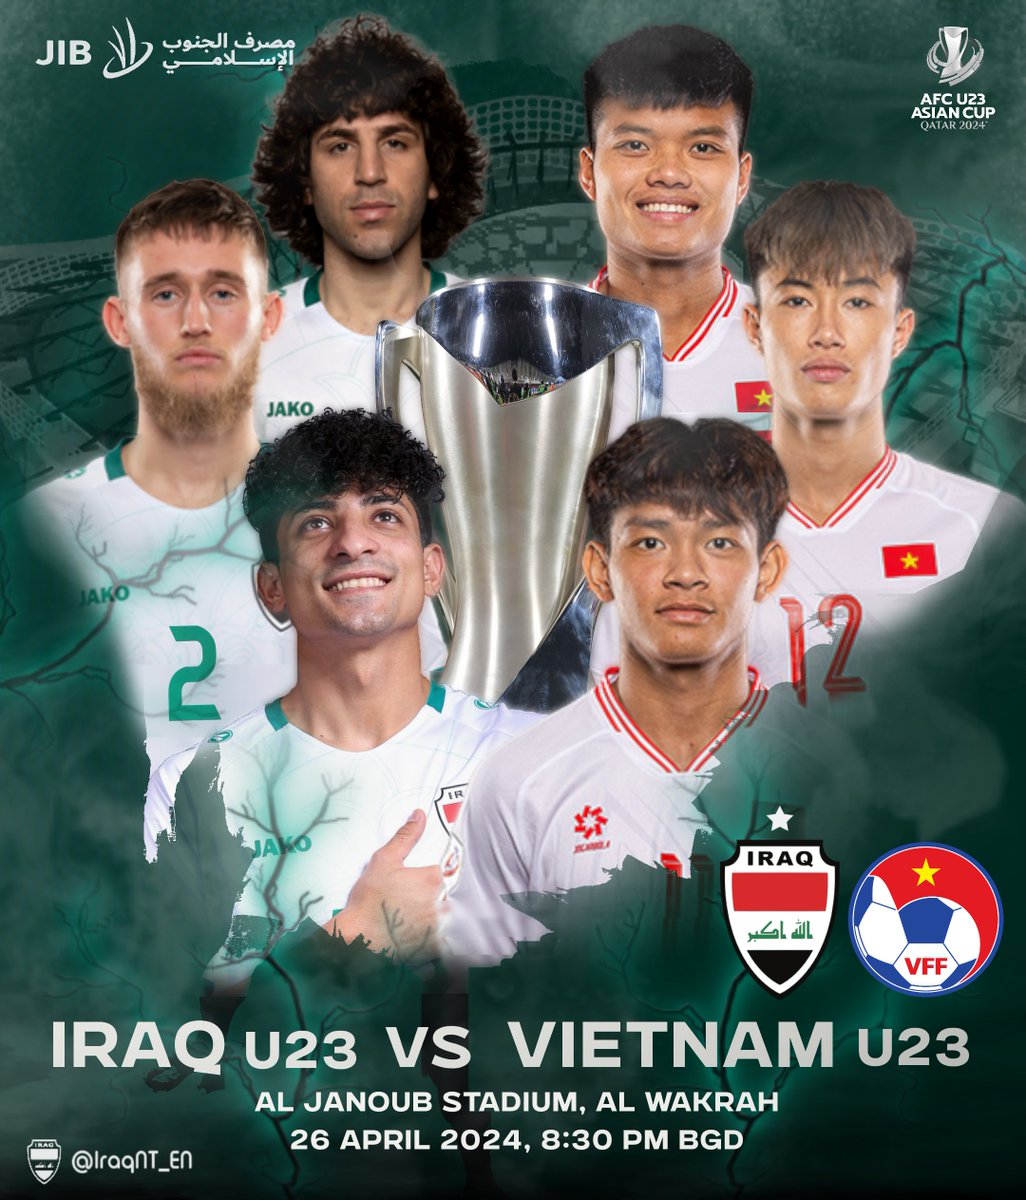 OFFICIAL: We will face Vietnam in the #AFCU23 quarter-final on Friday! 🇮🇶🇻🇳 #IRQvVIE #RoadToParis2024